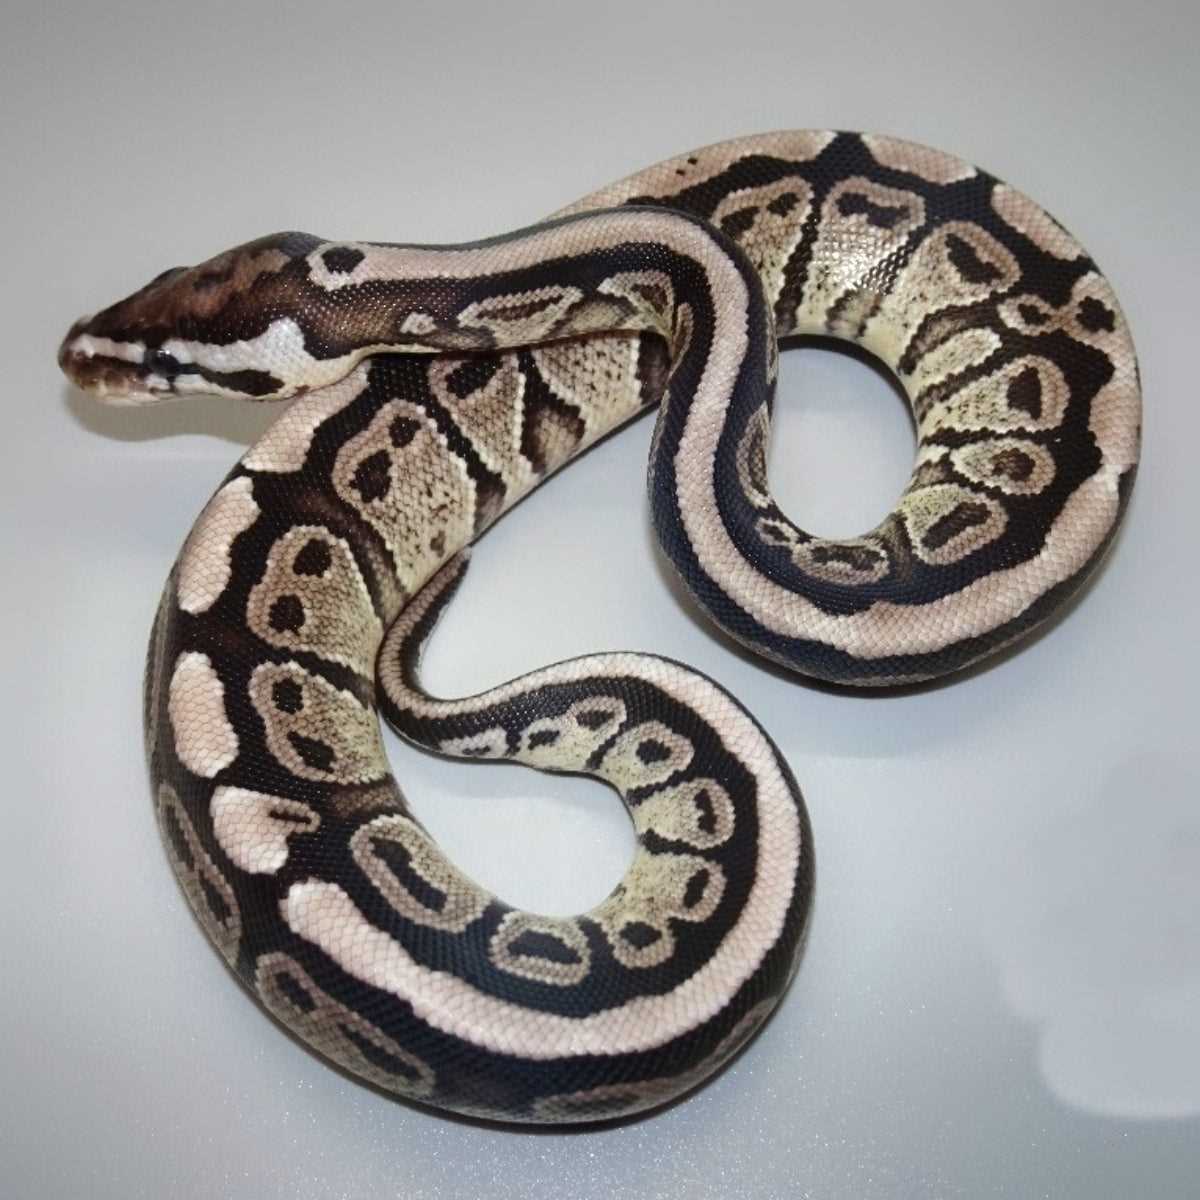 Are axanthic ball pythons more difficult to care for?